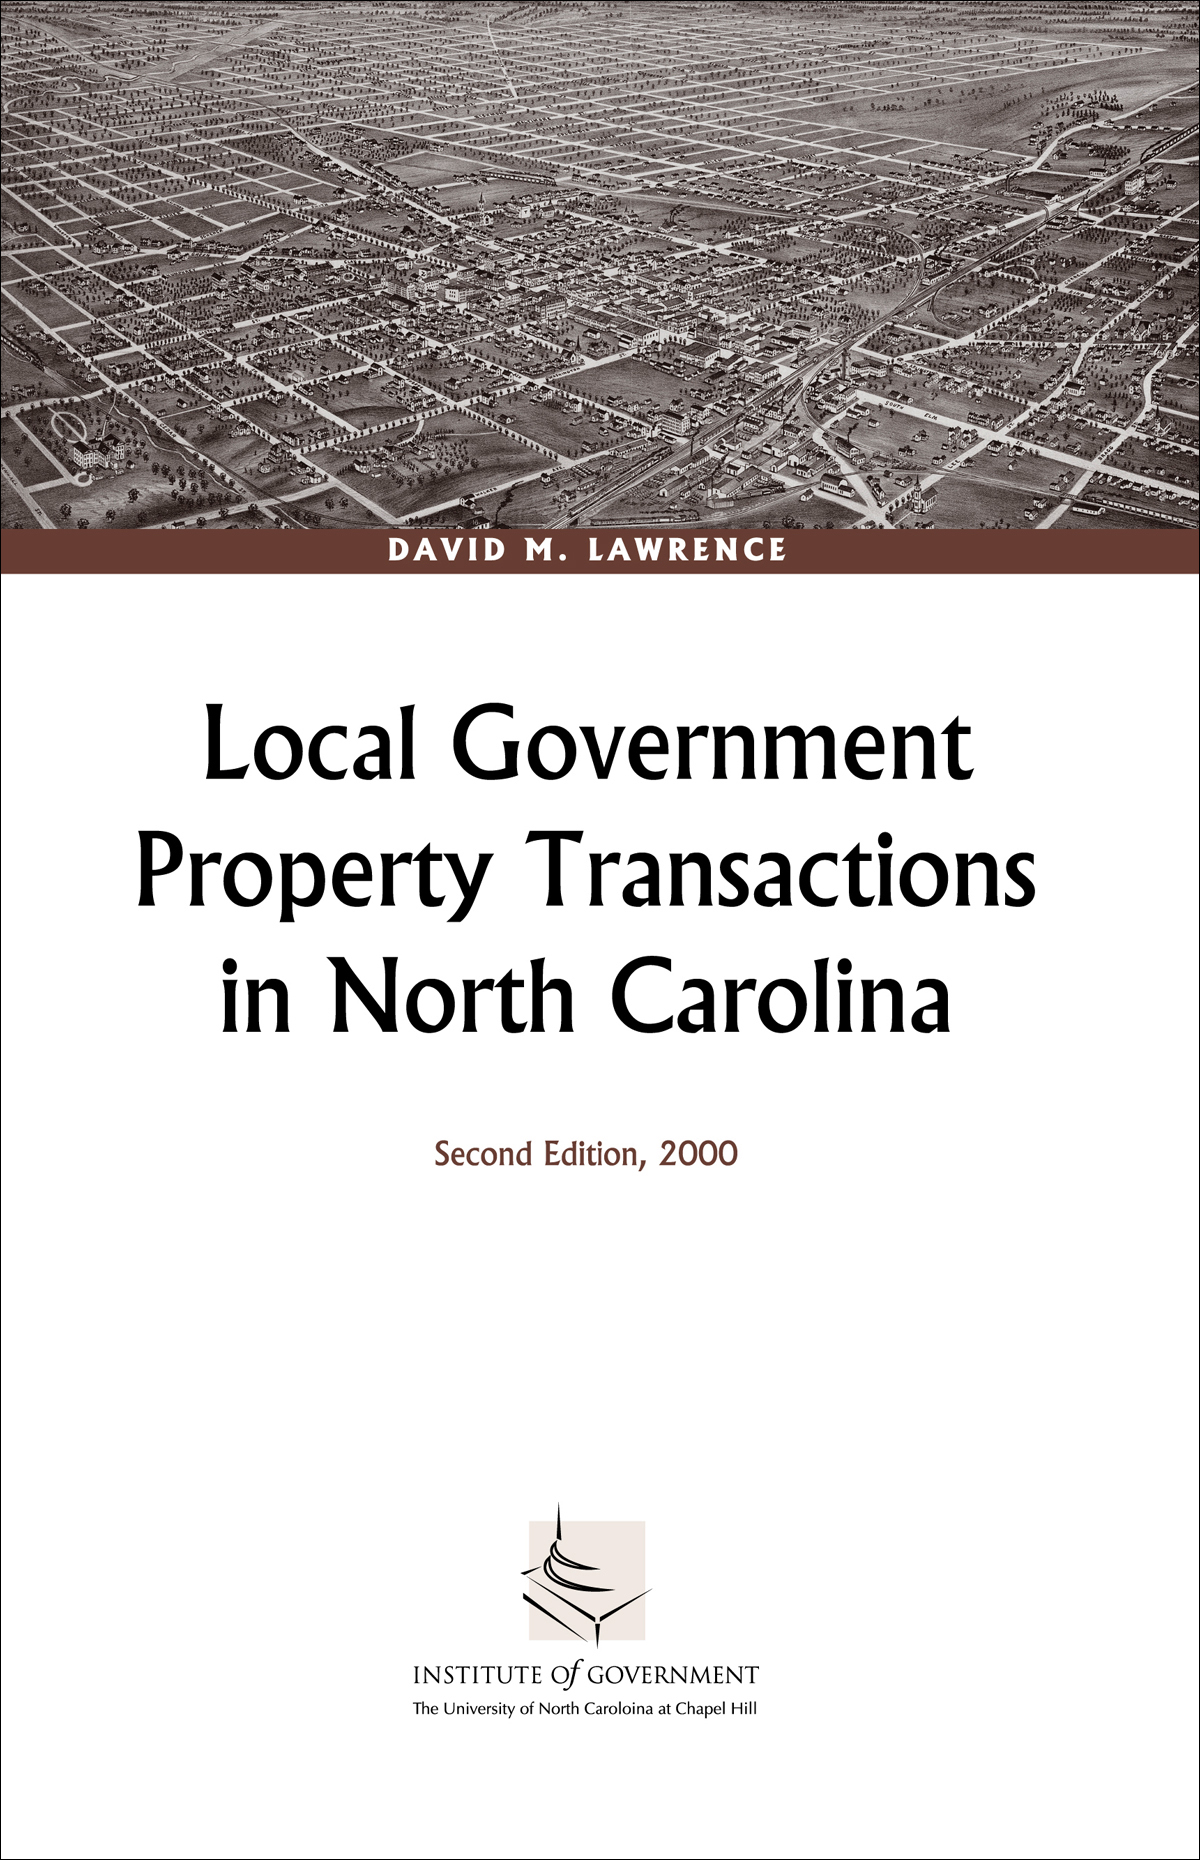 Local Government Property Transactions in North Carolina | UNC ...